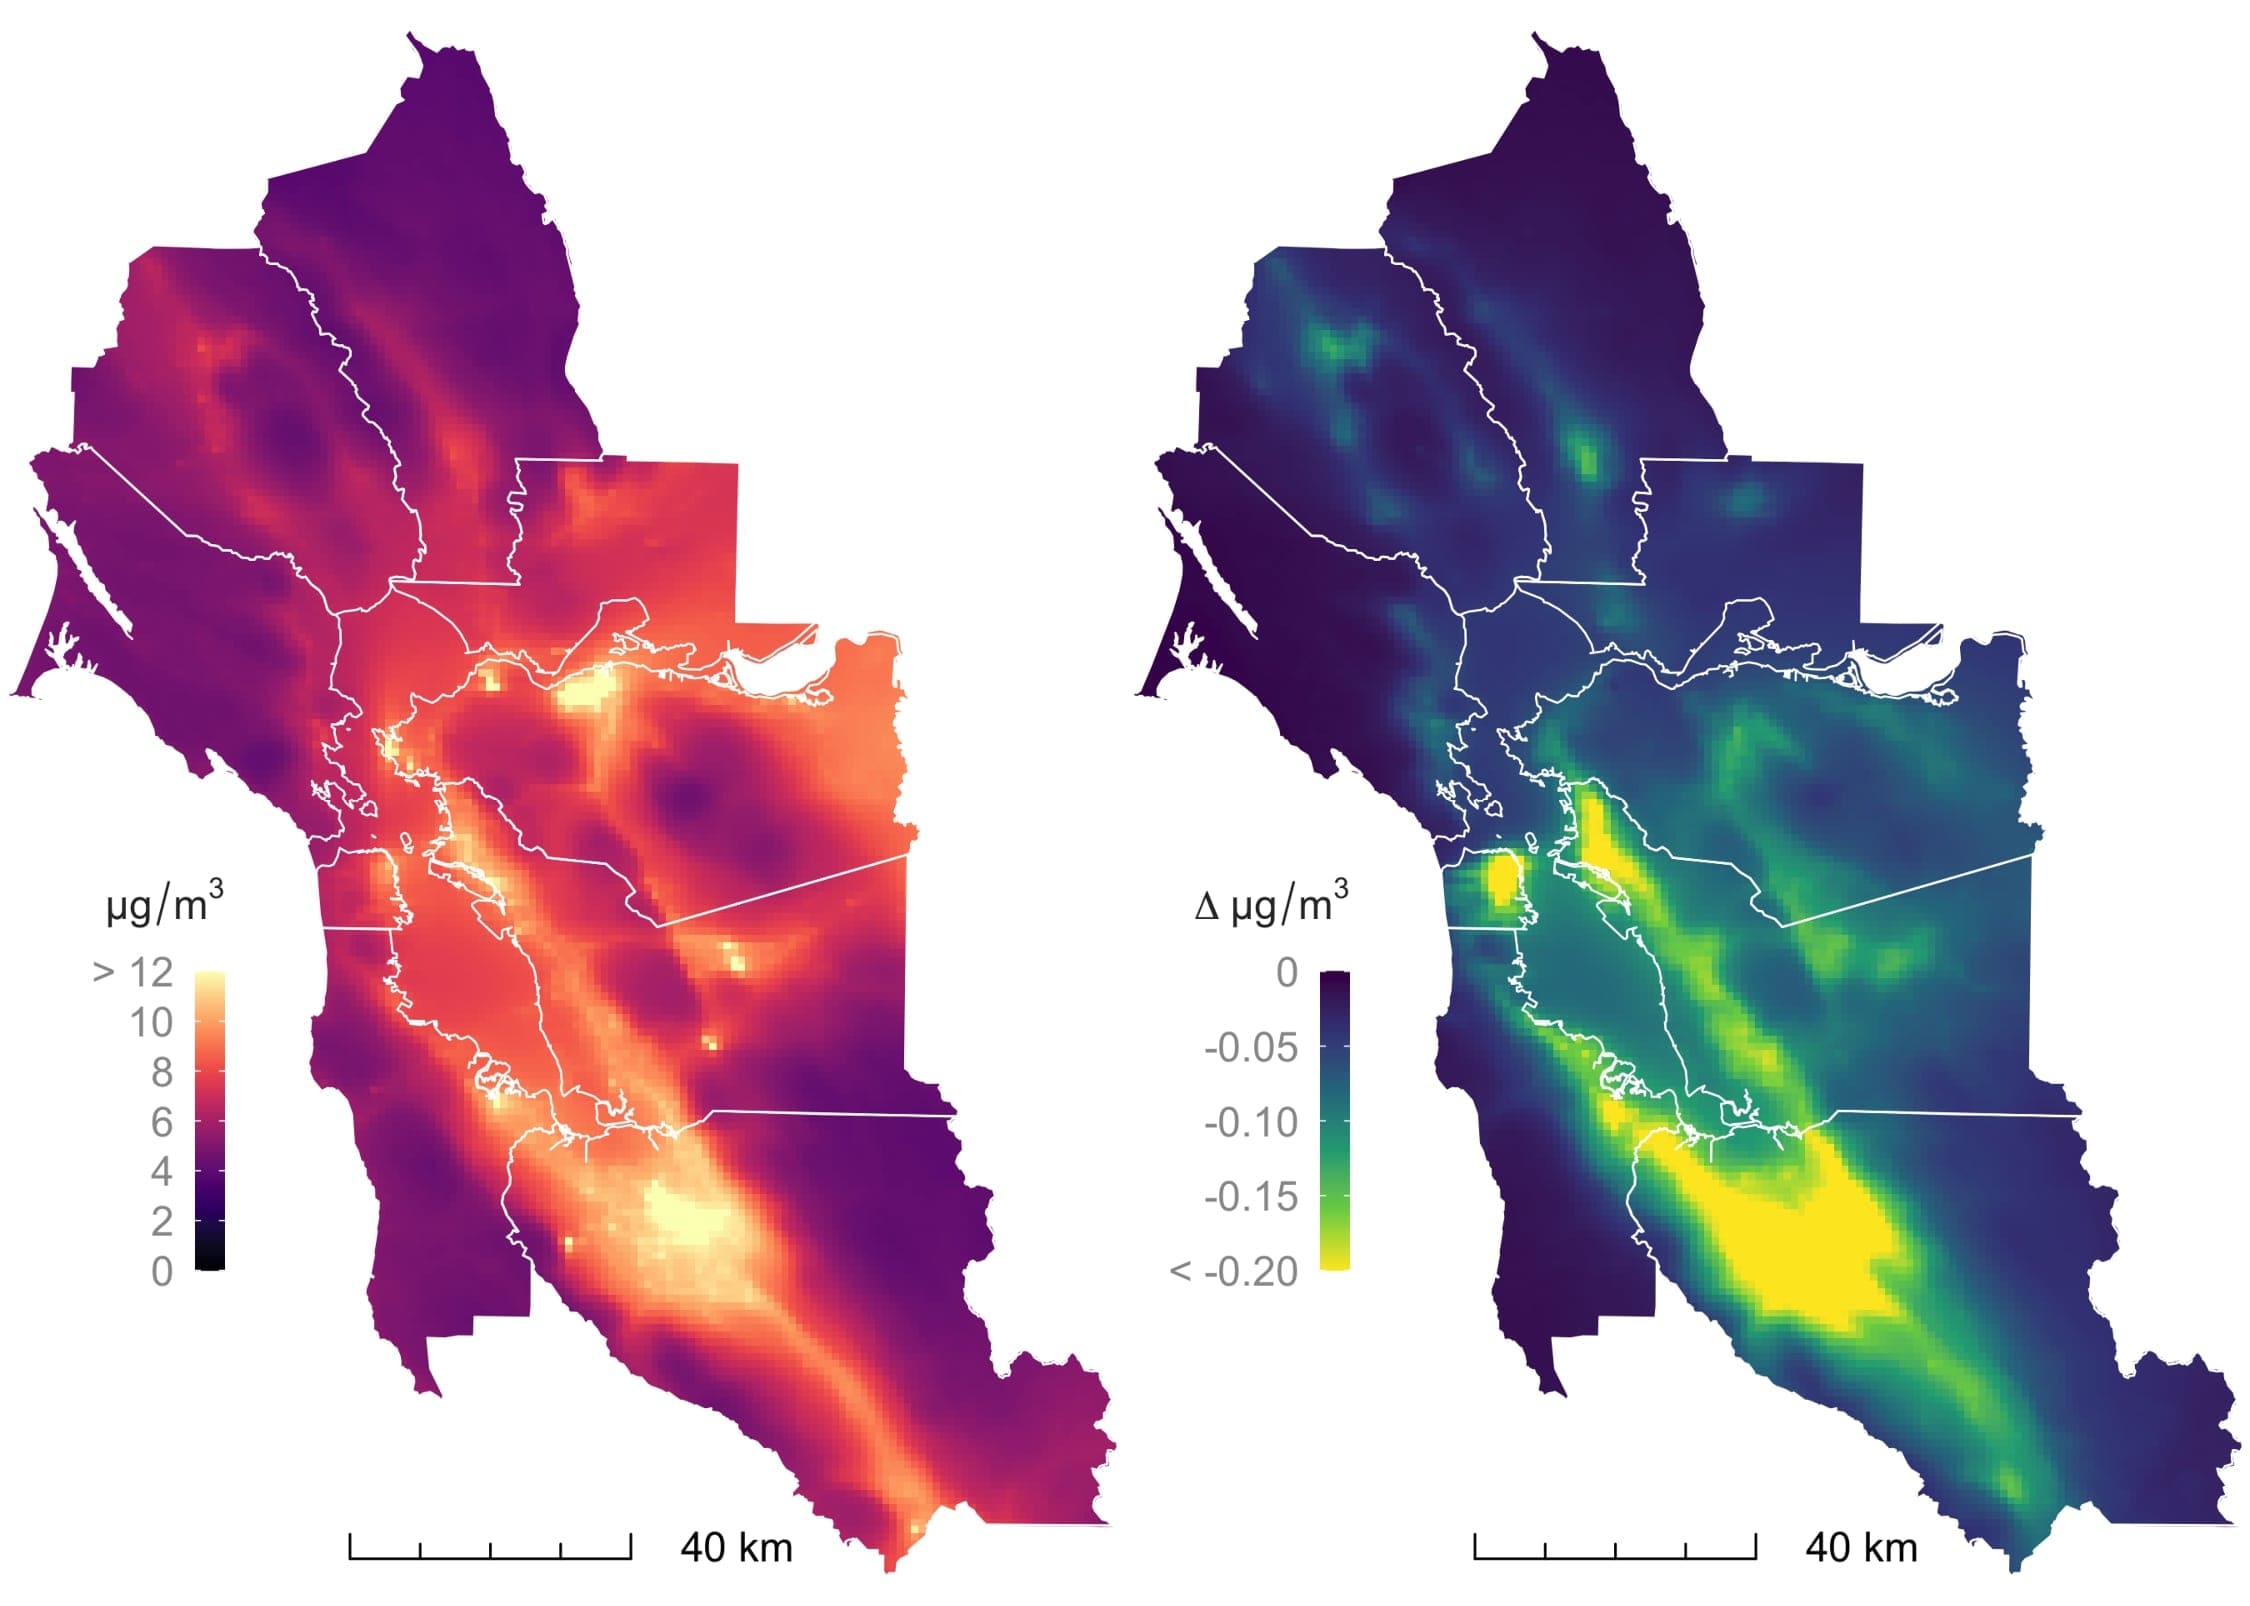 Maps showing reduction in particulate matter